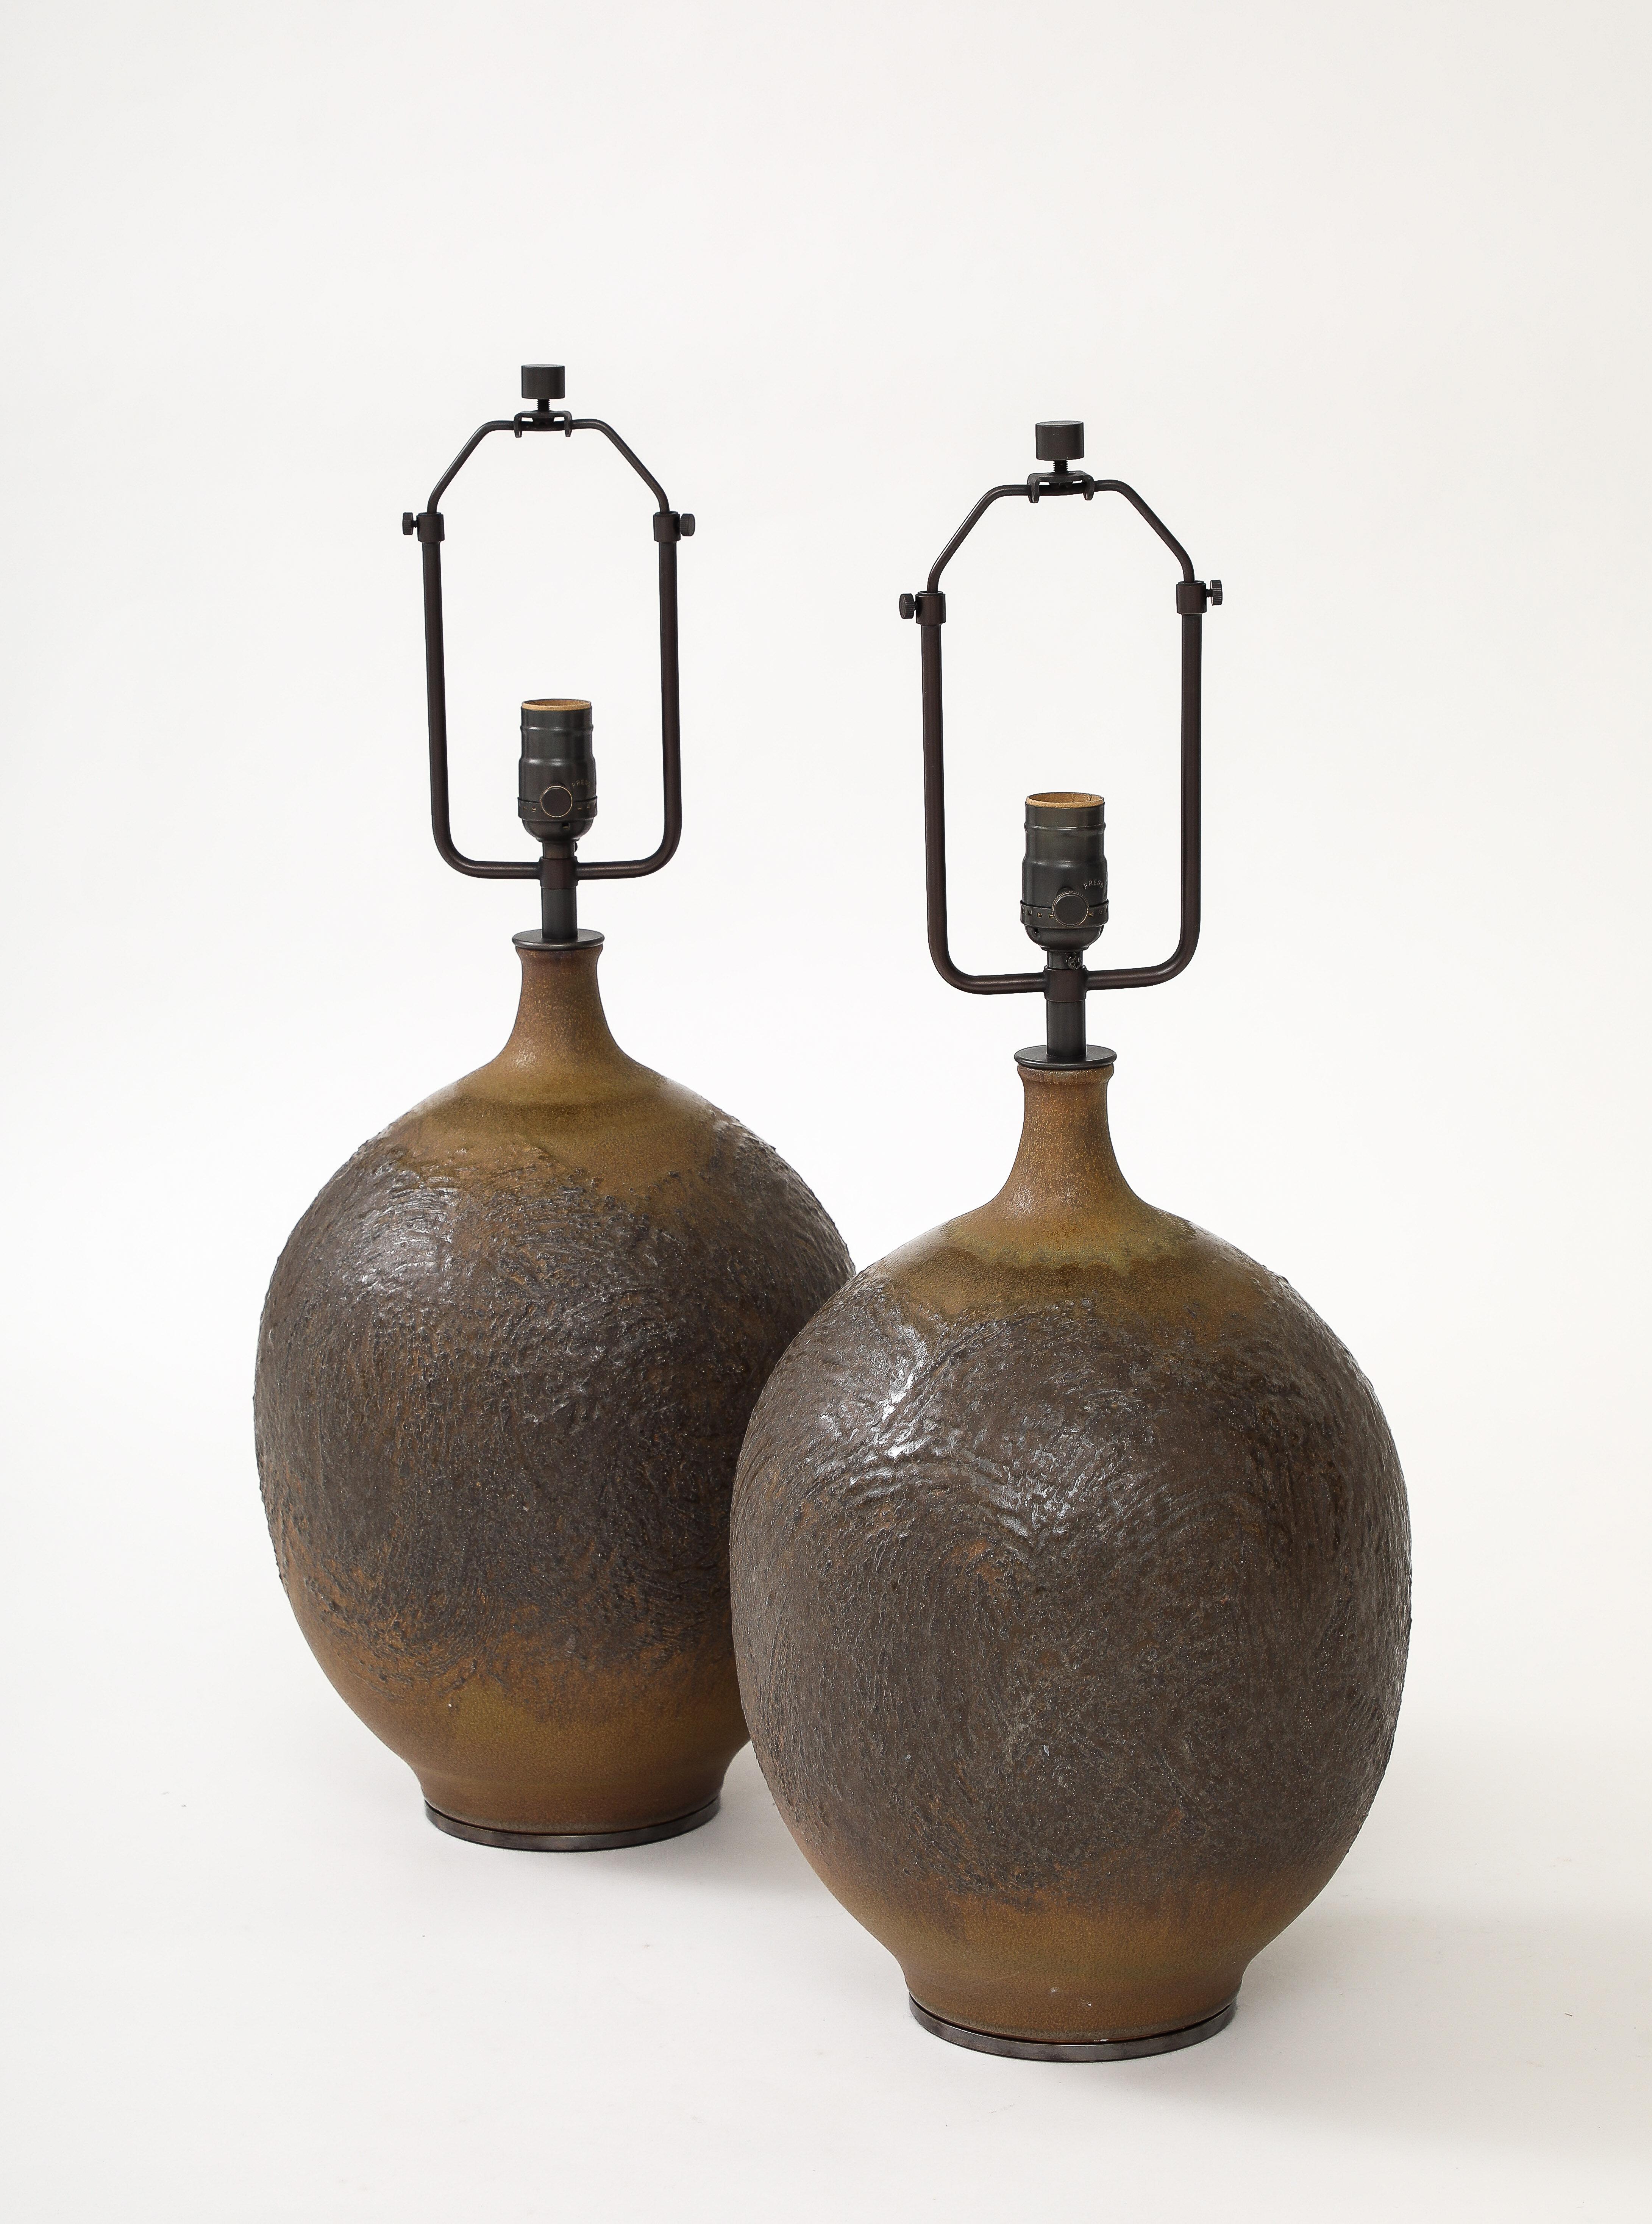 These glazed ceramic table lamps have a beautiful tone and texture; it almost appears that they're made of cast bronze.